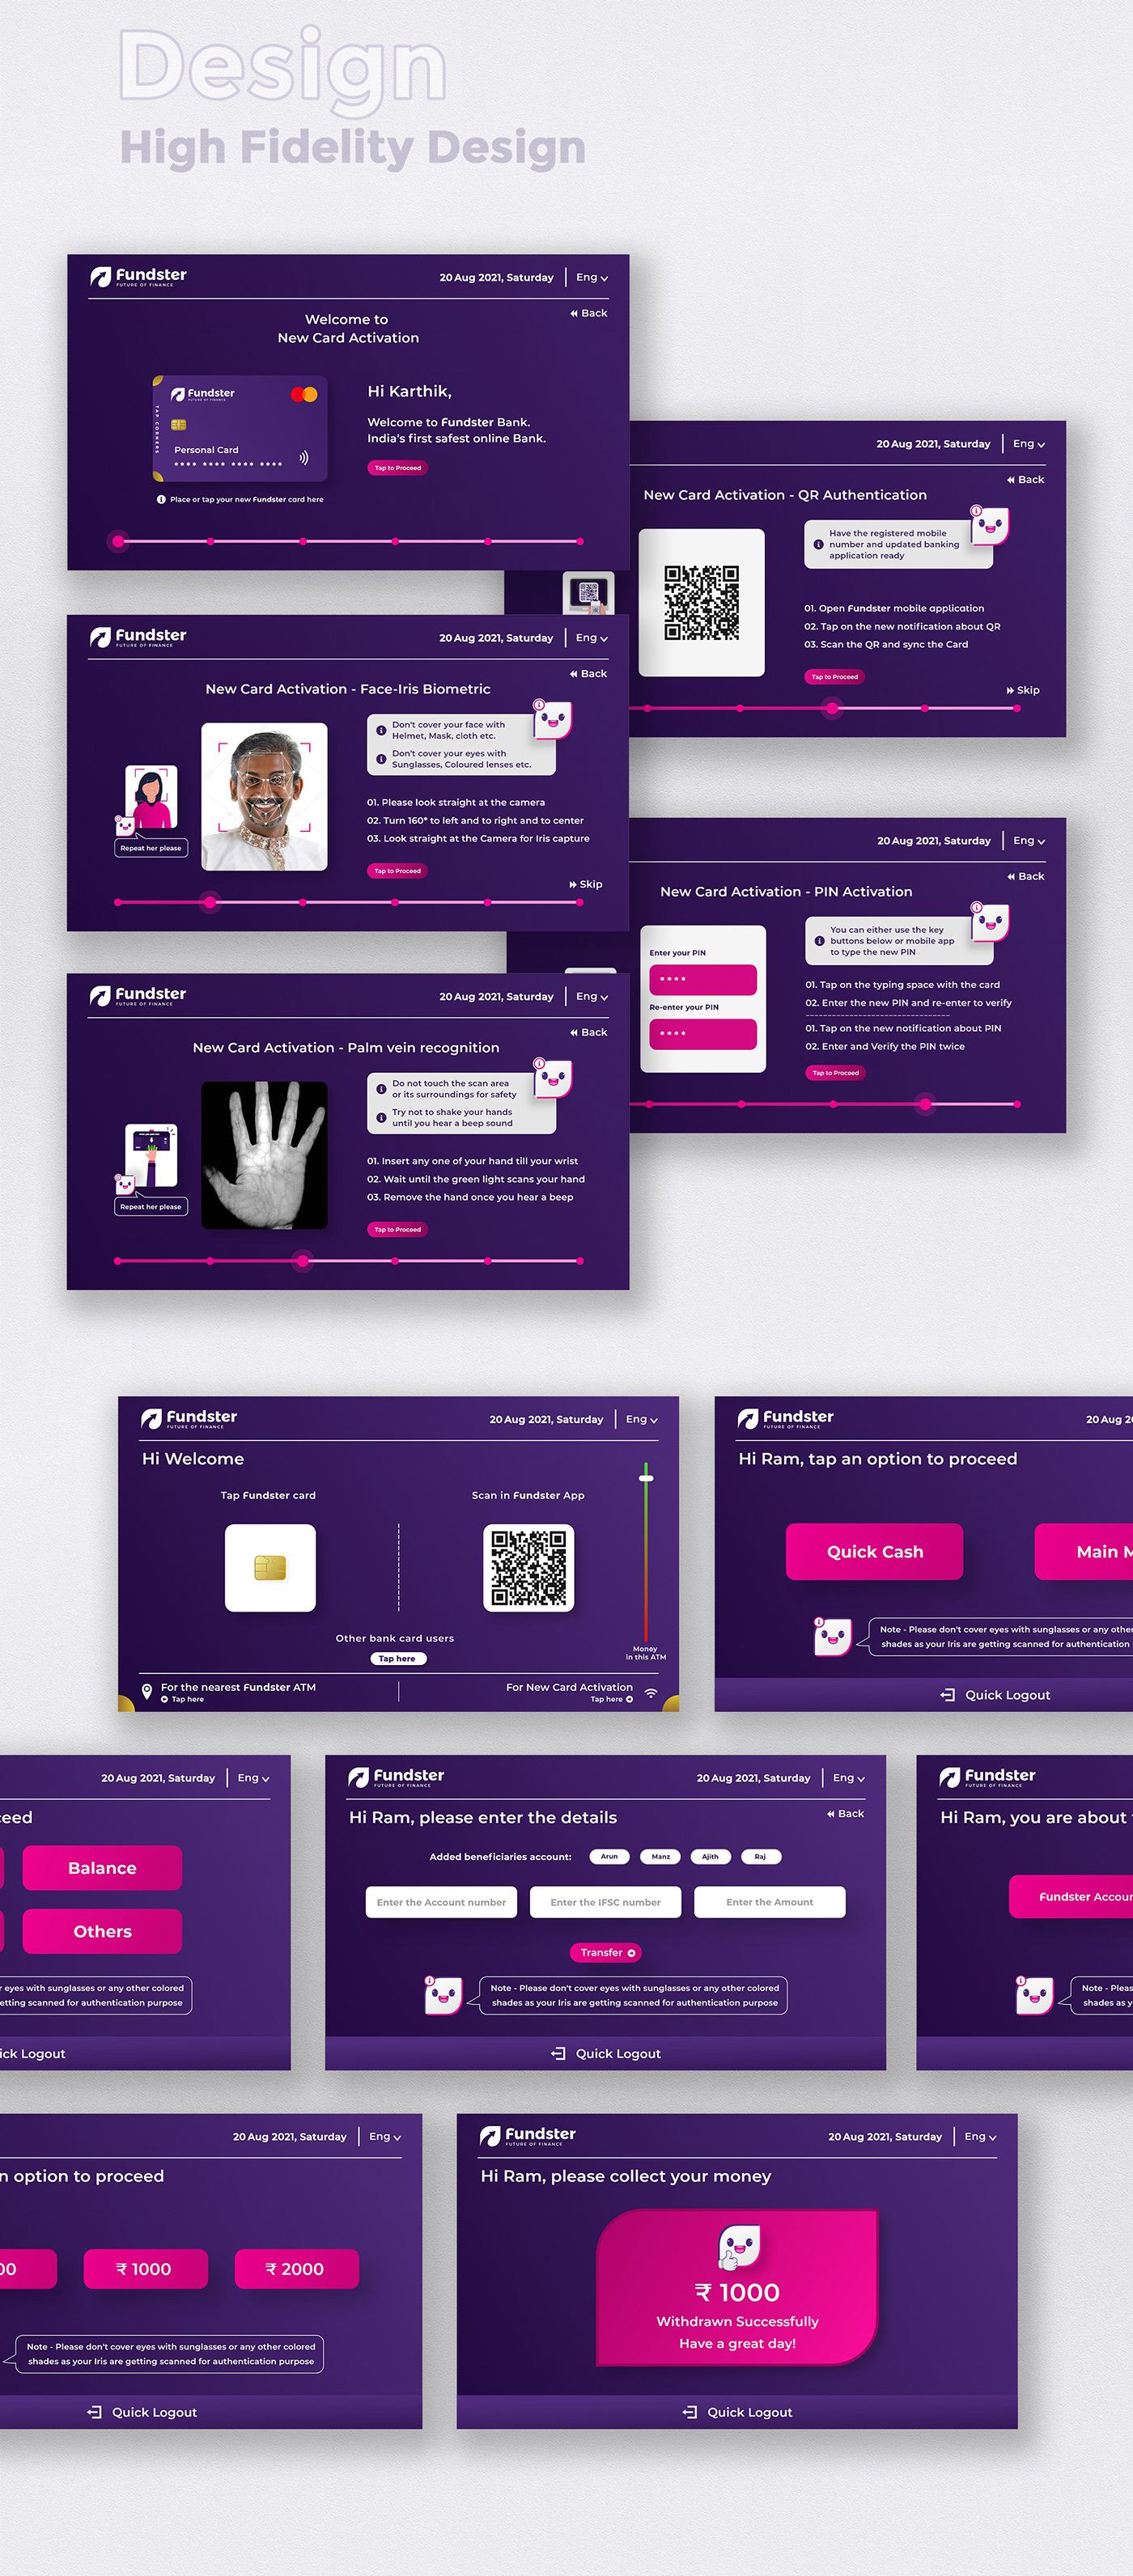 adobexd ATM REDESIGN graphicdesign interactiondesign landing page productdesign uidesign uiux UserExperience uxdesign